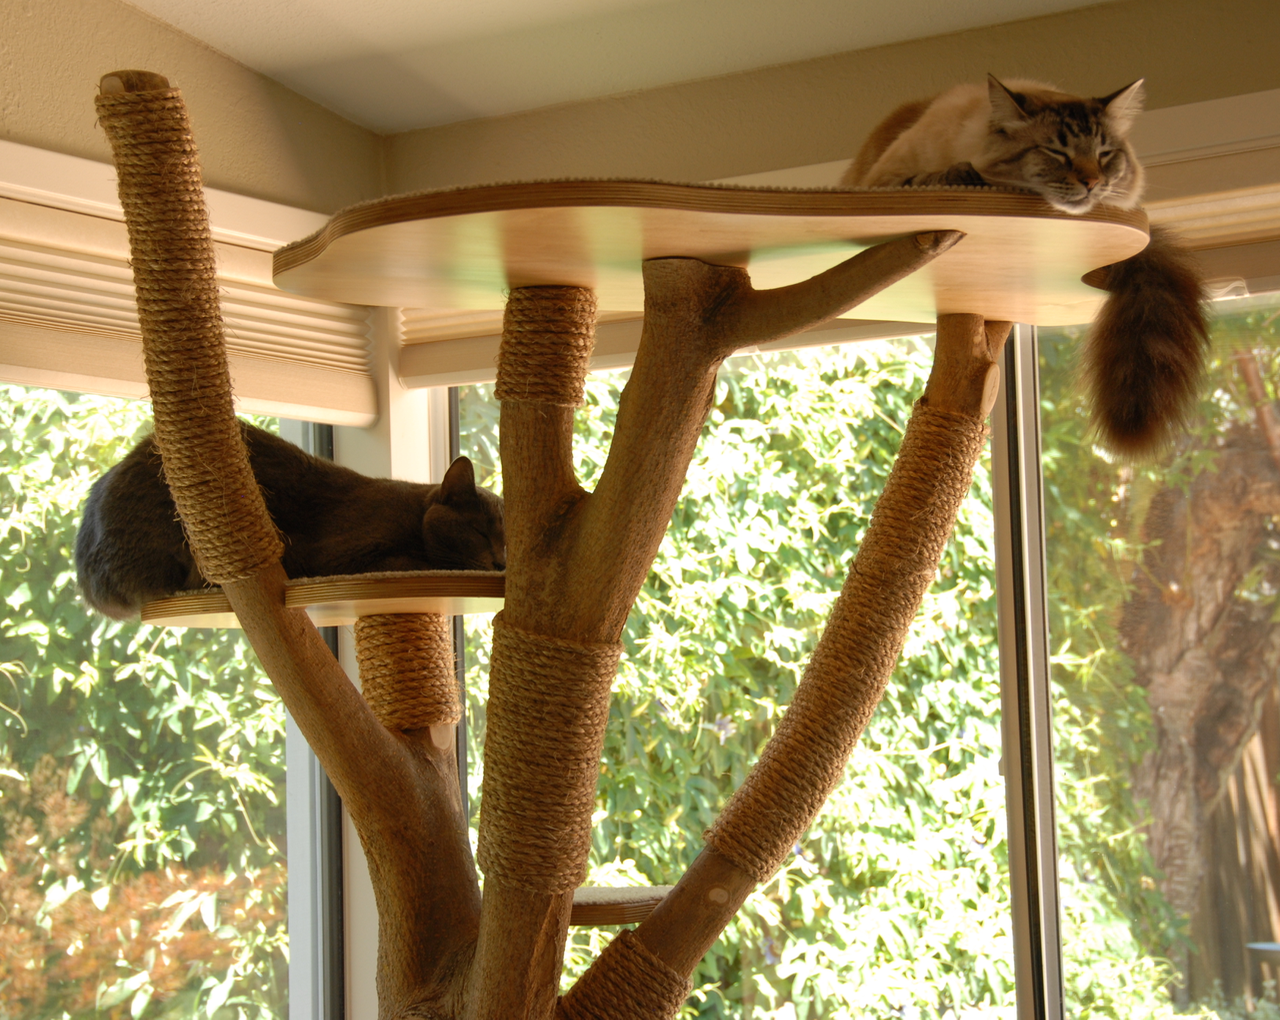 44 Top Pictures Cat Tree That Looks Like A Tree - Cat Trees that look like real Trees | Hidden Hollow Cat ...